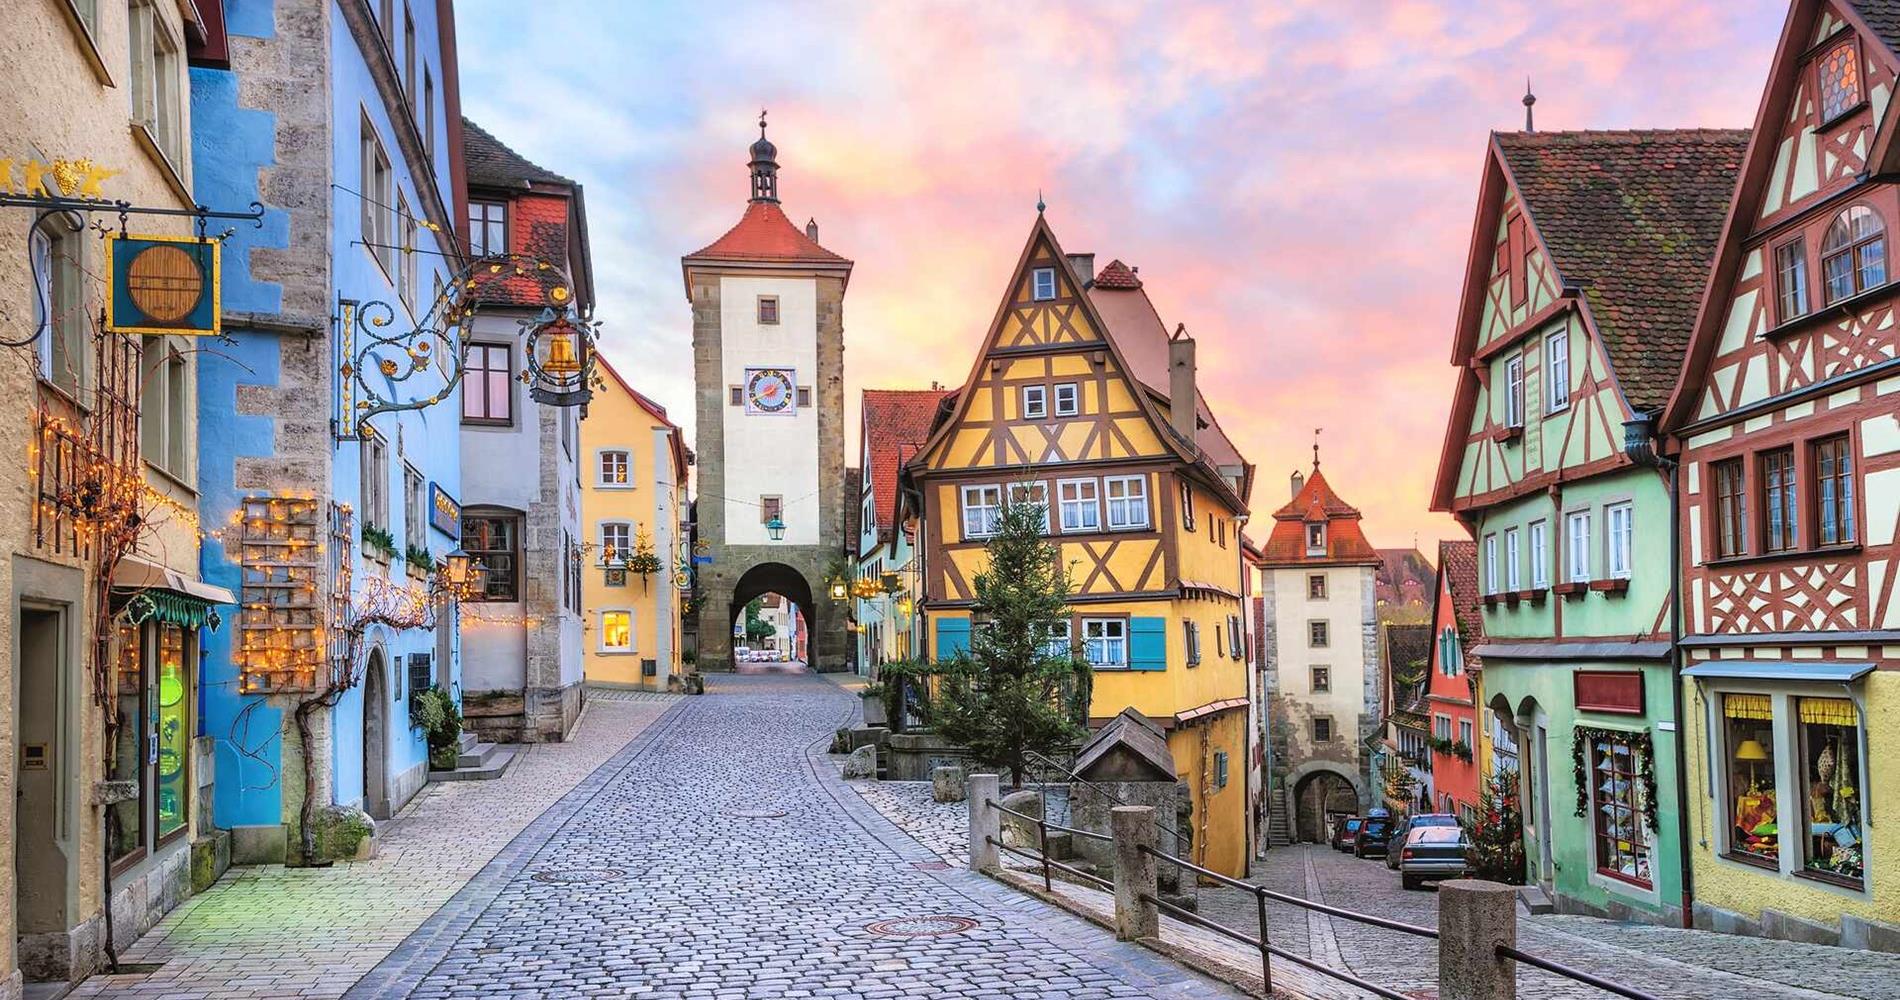 Colourful Houses in Rothenberg, Germany